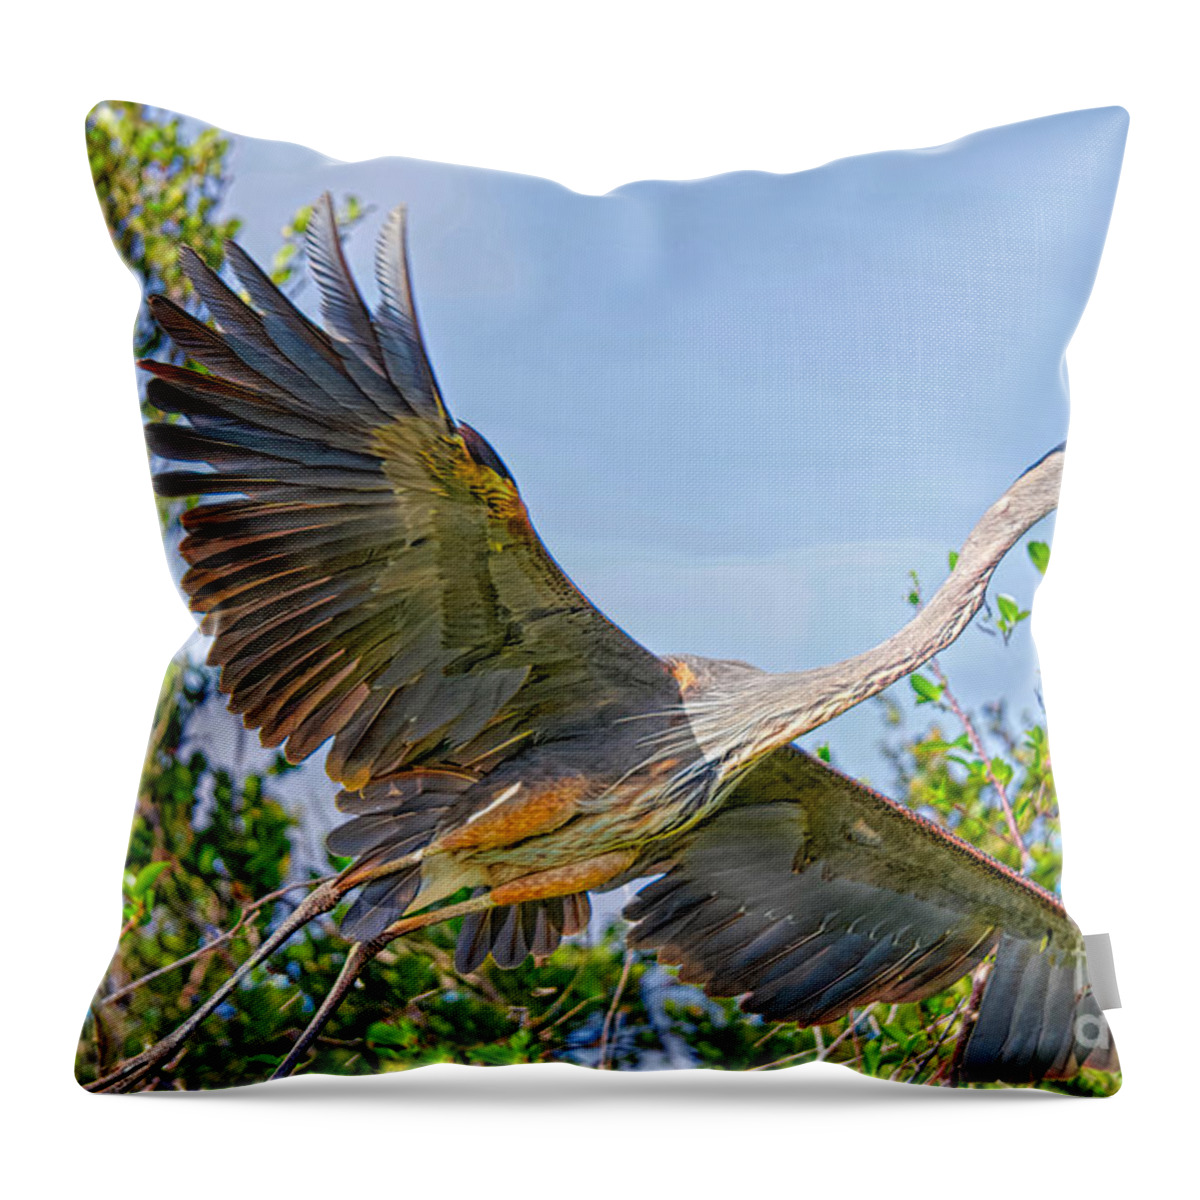 Coastal Birds Throw Pillow featuring the photograph Wing'n It by Judy Kay